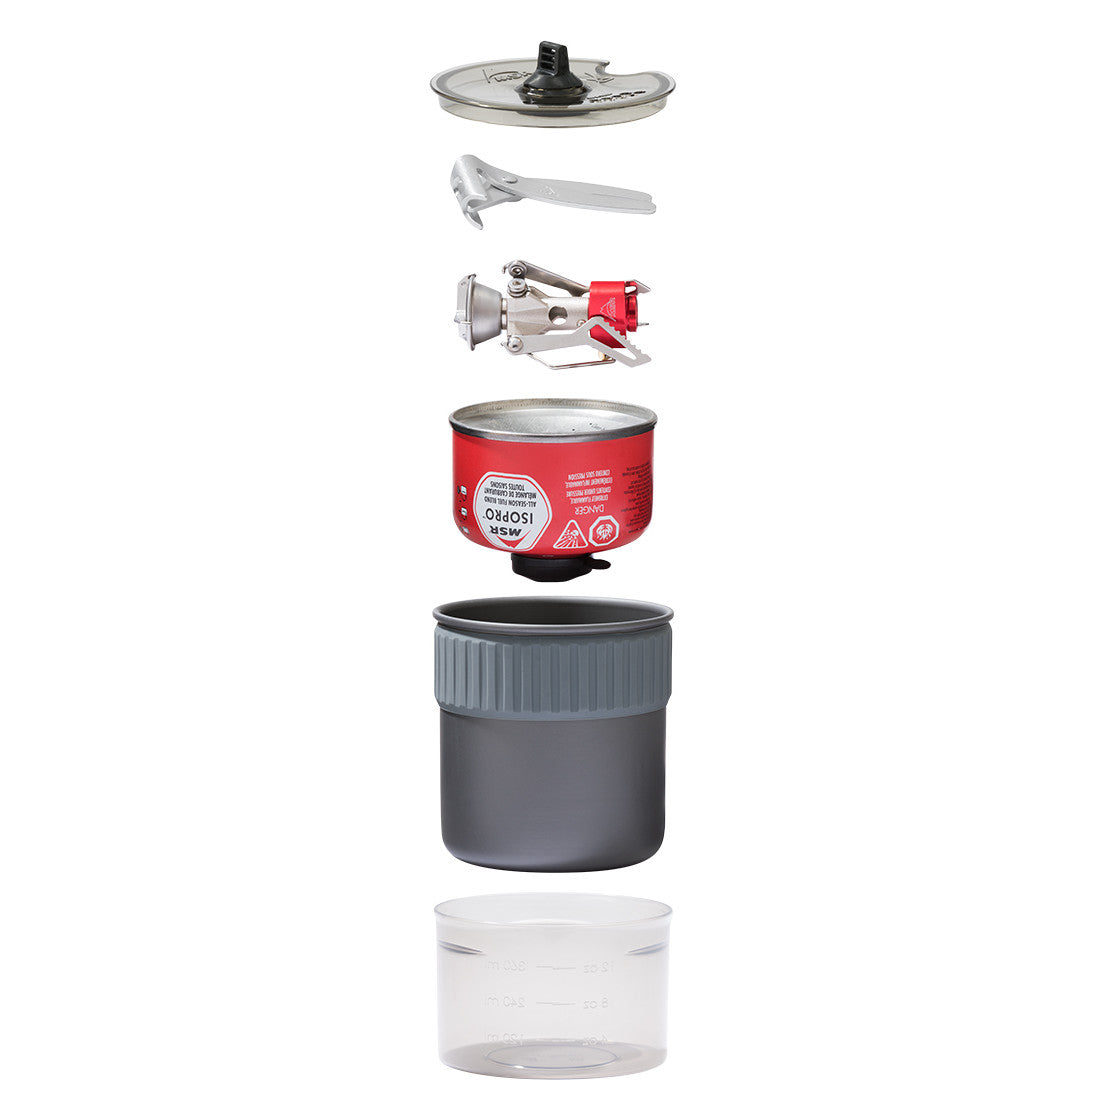 MSR PocketRocket 2 Mini Stove Kit, with contents shown stacked on top of one another